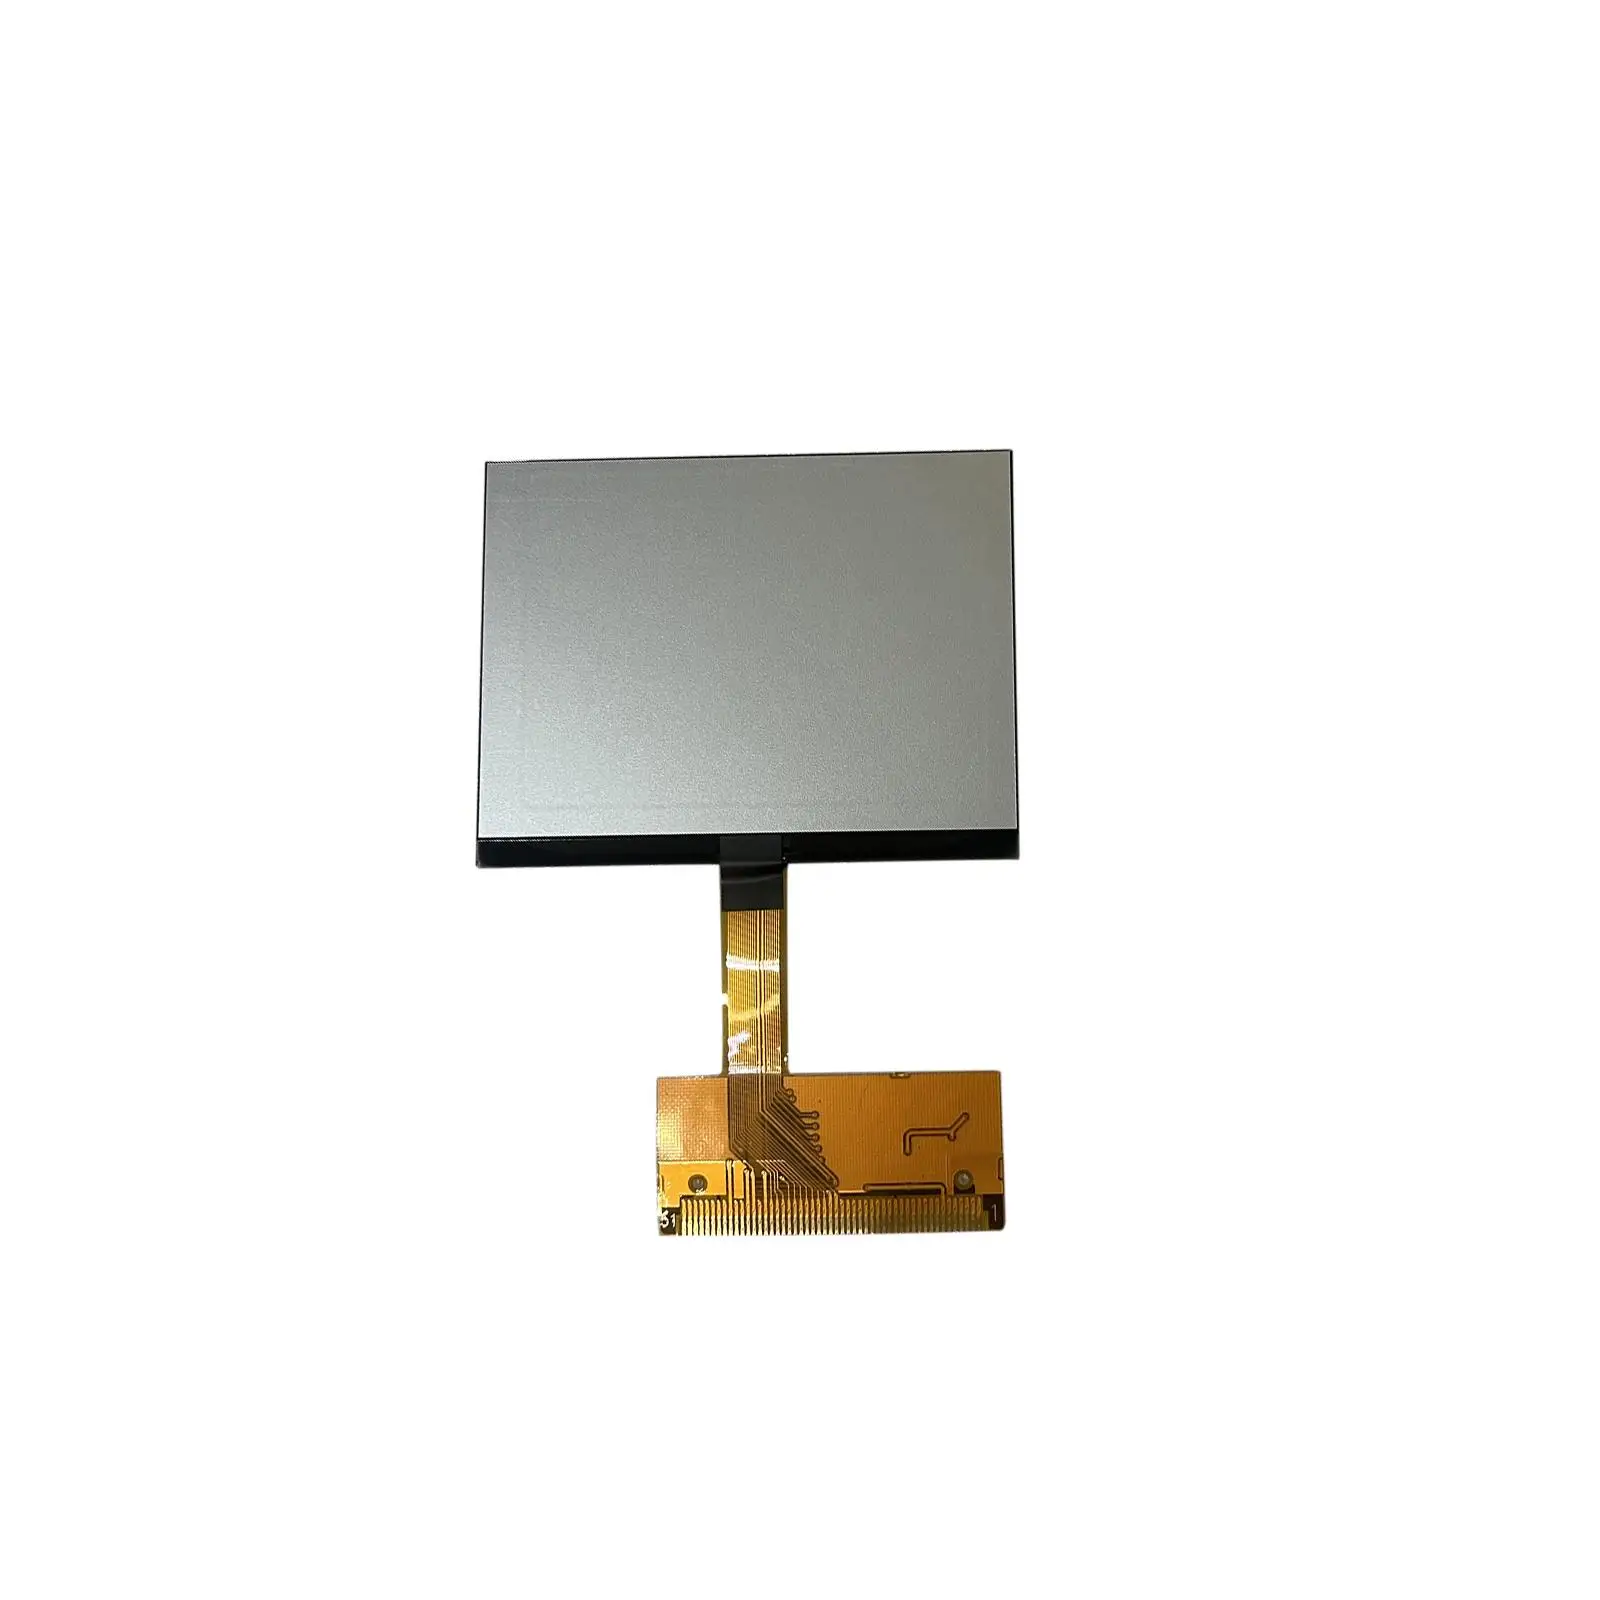 LCD Display Replacement Automobile Repairing Accessory for Audi A3 A4